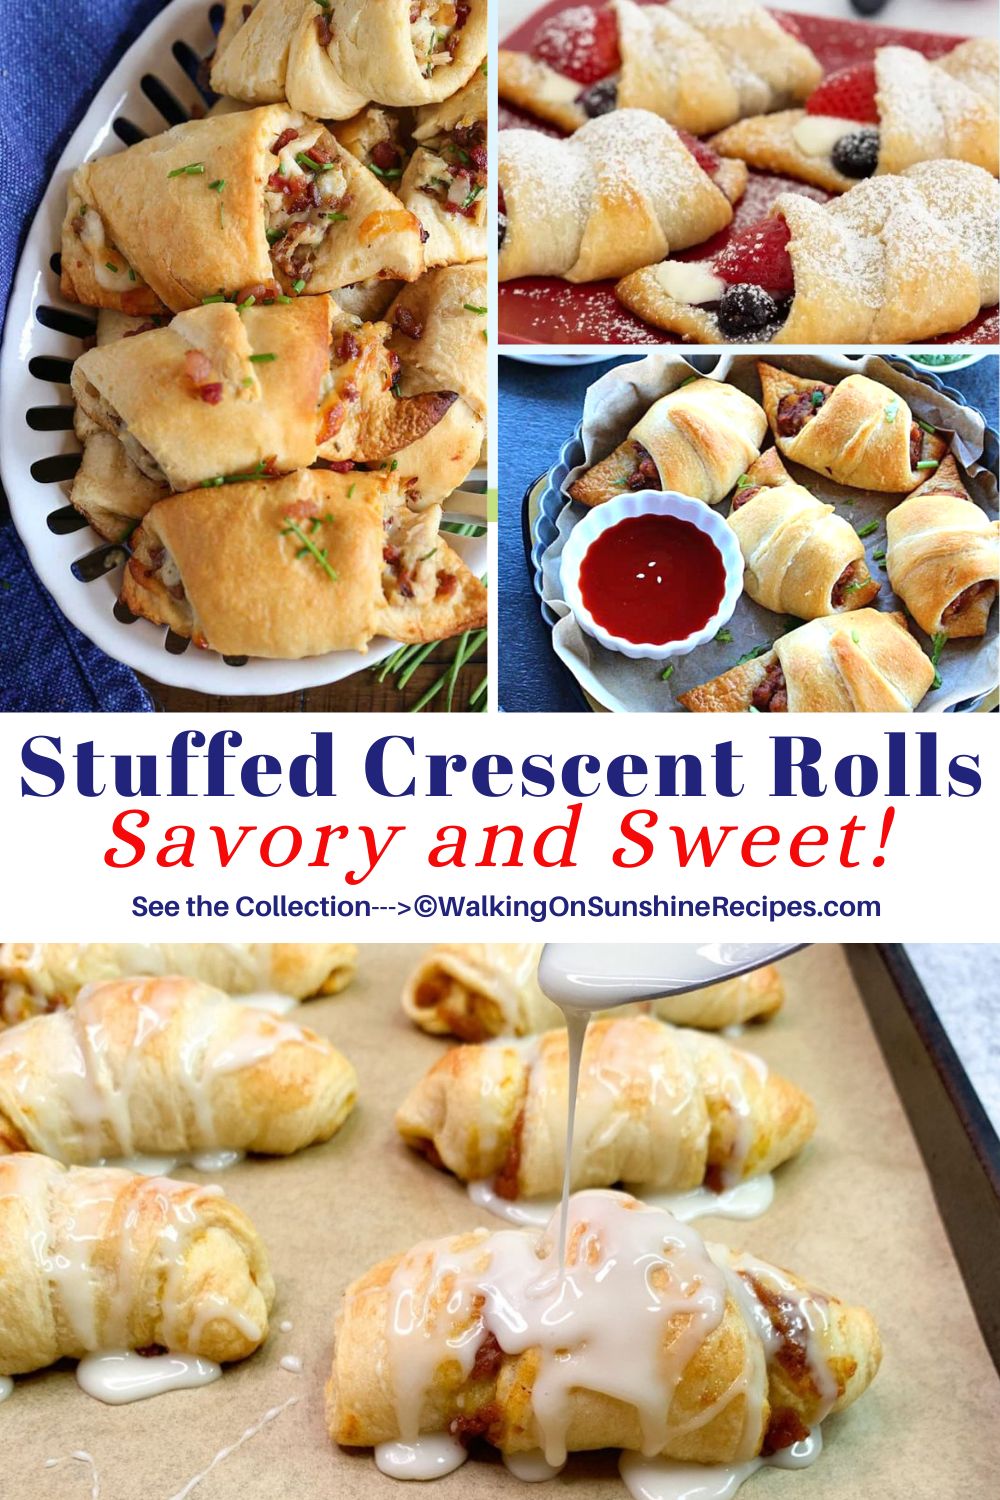 Savory and Sweet Stuffed Crescent Roll recipes.